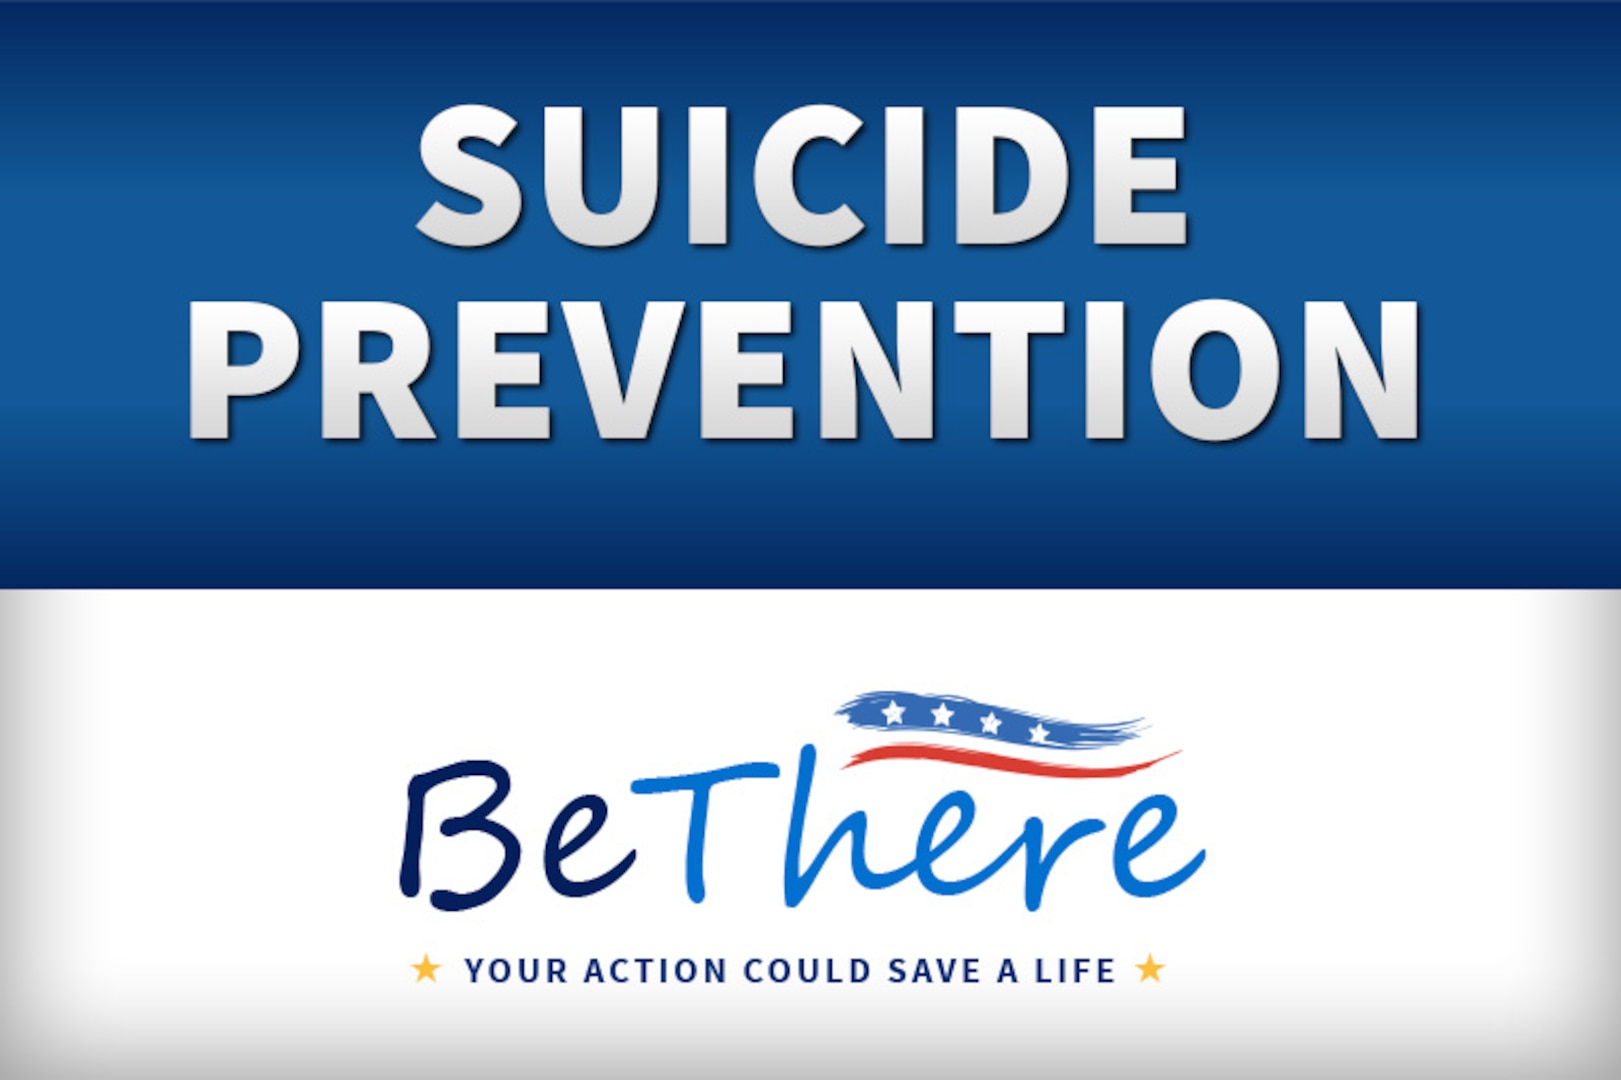 We can all play a role in preventing suicide, but many people don't know what they can do to support the service member or veteran who is going through a difficult time. The Defense Department's theme for Suicide Prevention Month is: BeThere - your action could save a life.